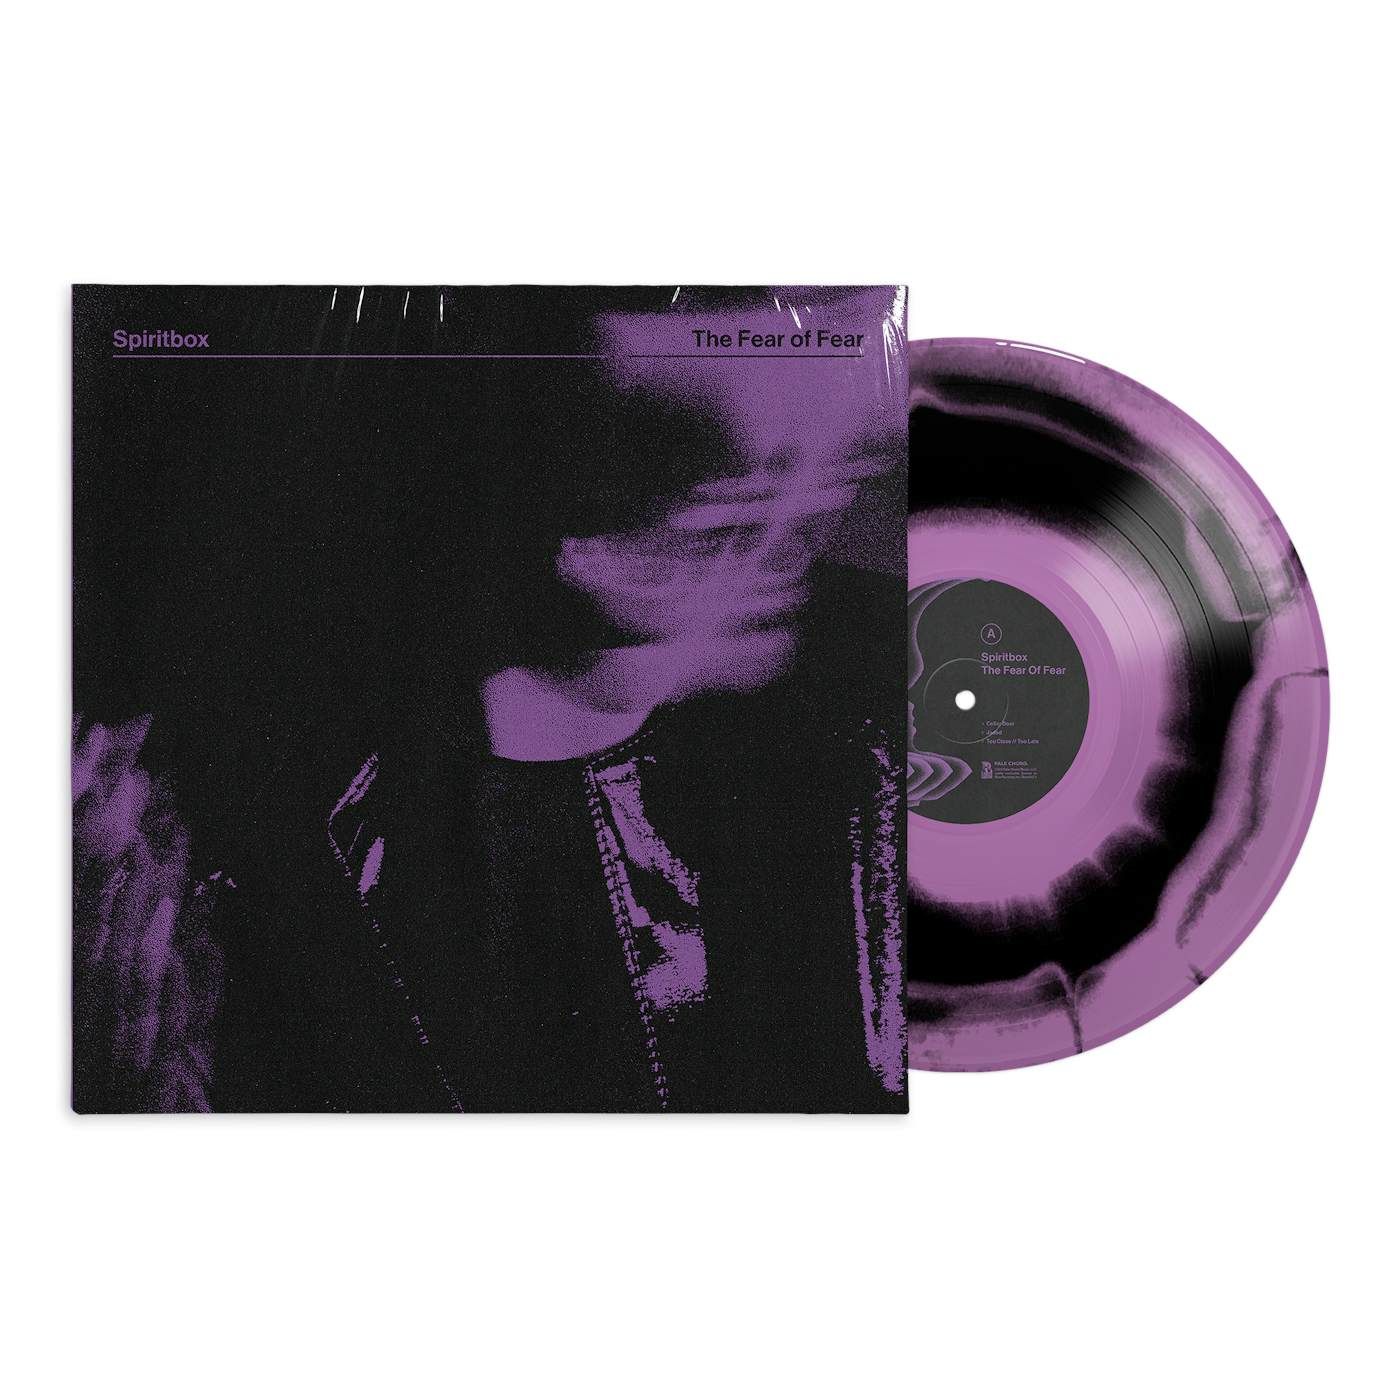 Spiritbox - "The Fear of Fear" 12"EP (Black/Violet Smush)